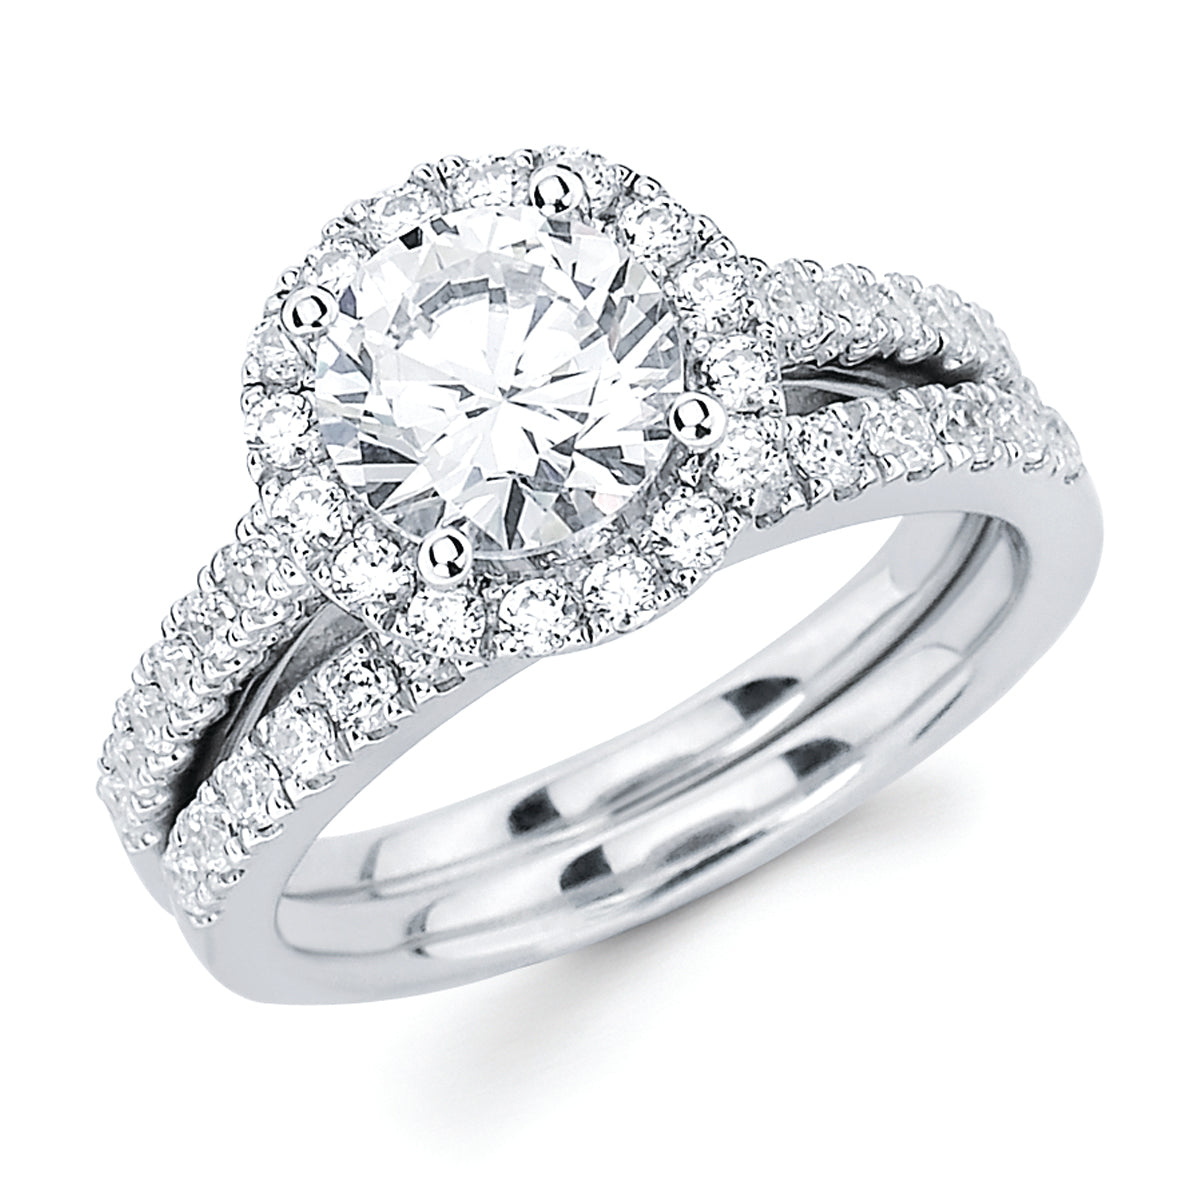 Halo Bridal: 1/2 Ctw. Diamond Halo Semi Mount available for 1-1/2 Ct. Round Center Diamond in 14K Gold